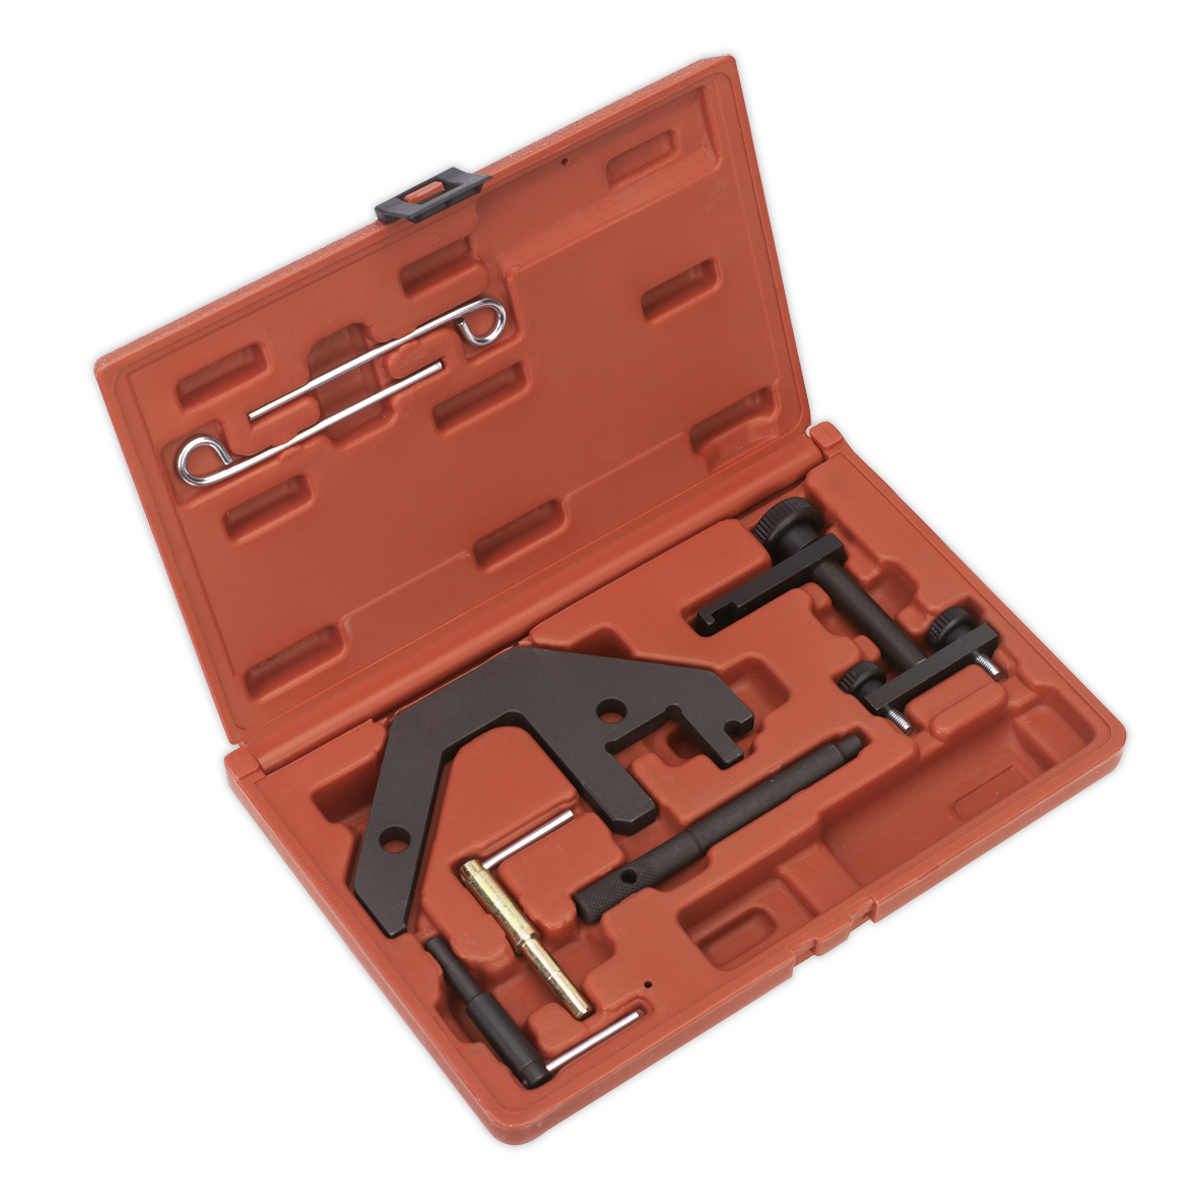 BMW Camshaft Alignment Tool Set for M42 and M50 engines 